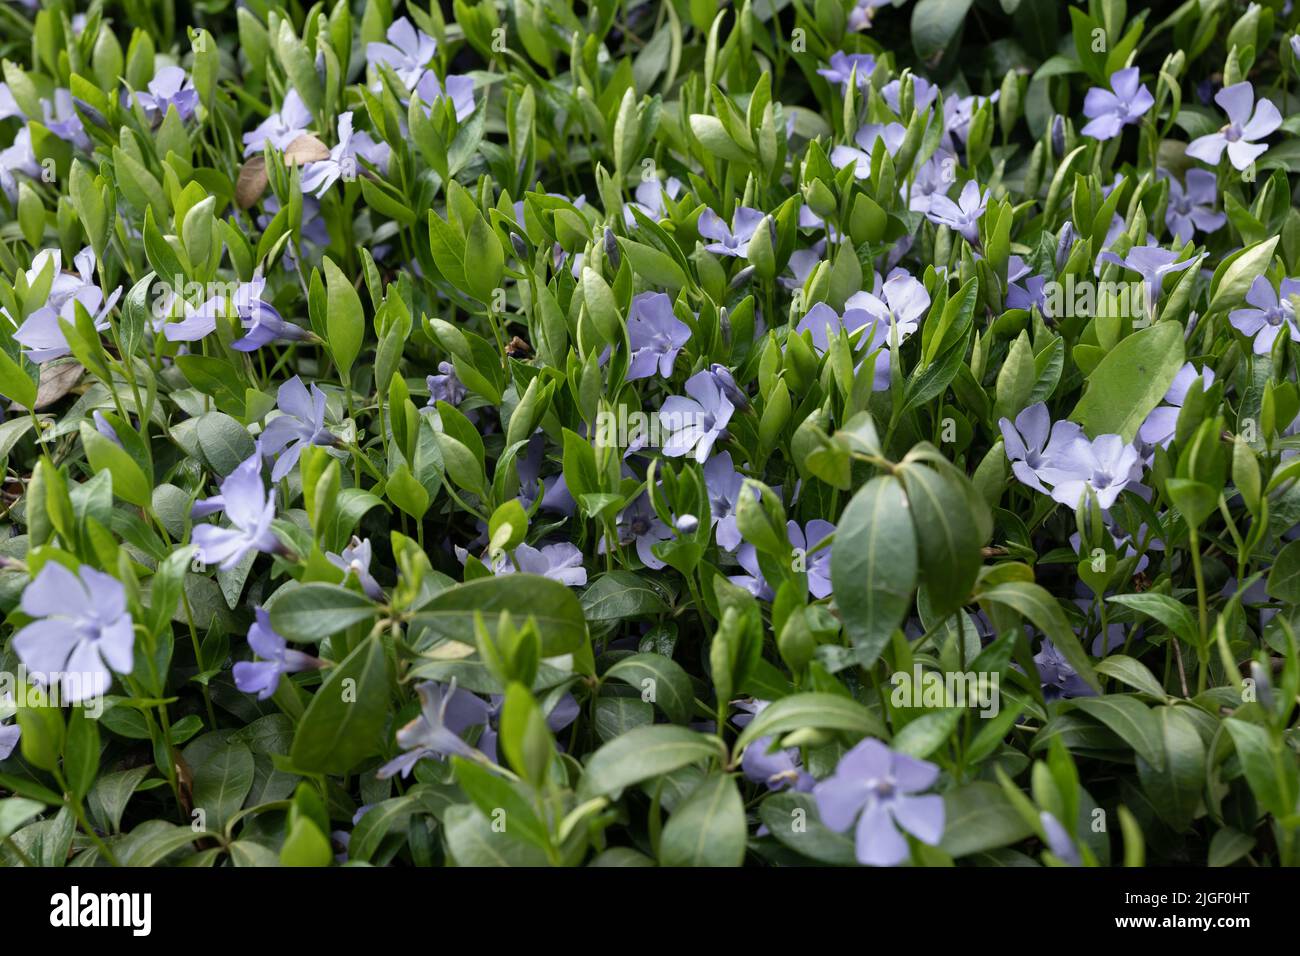 Vinca minor L. flowers, lesser periwinkle or dwarf periwinkle, species of flowering plant in the dogbane family Apocynaceae. Stock Photo